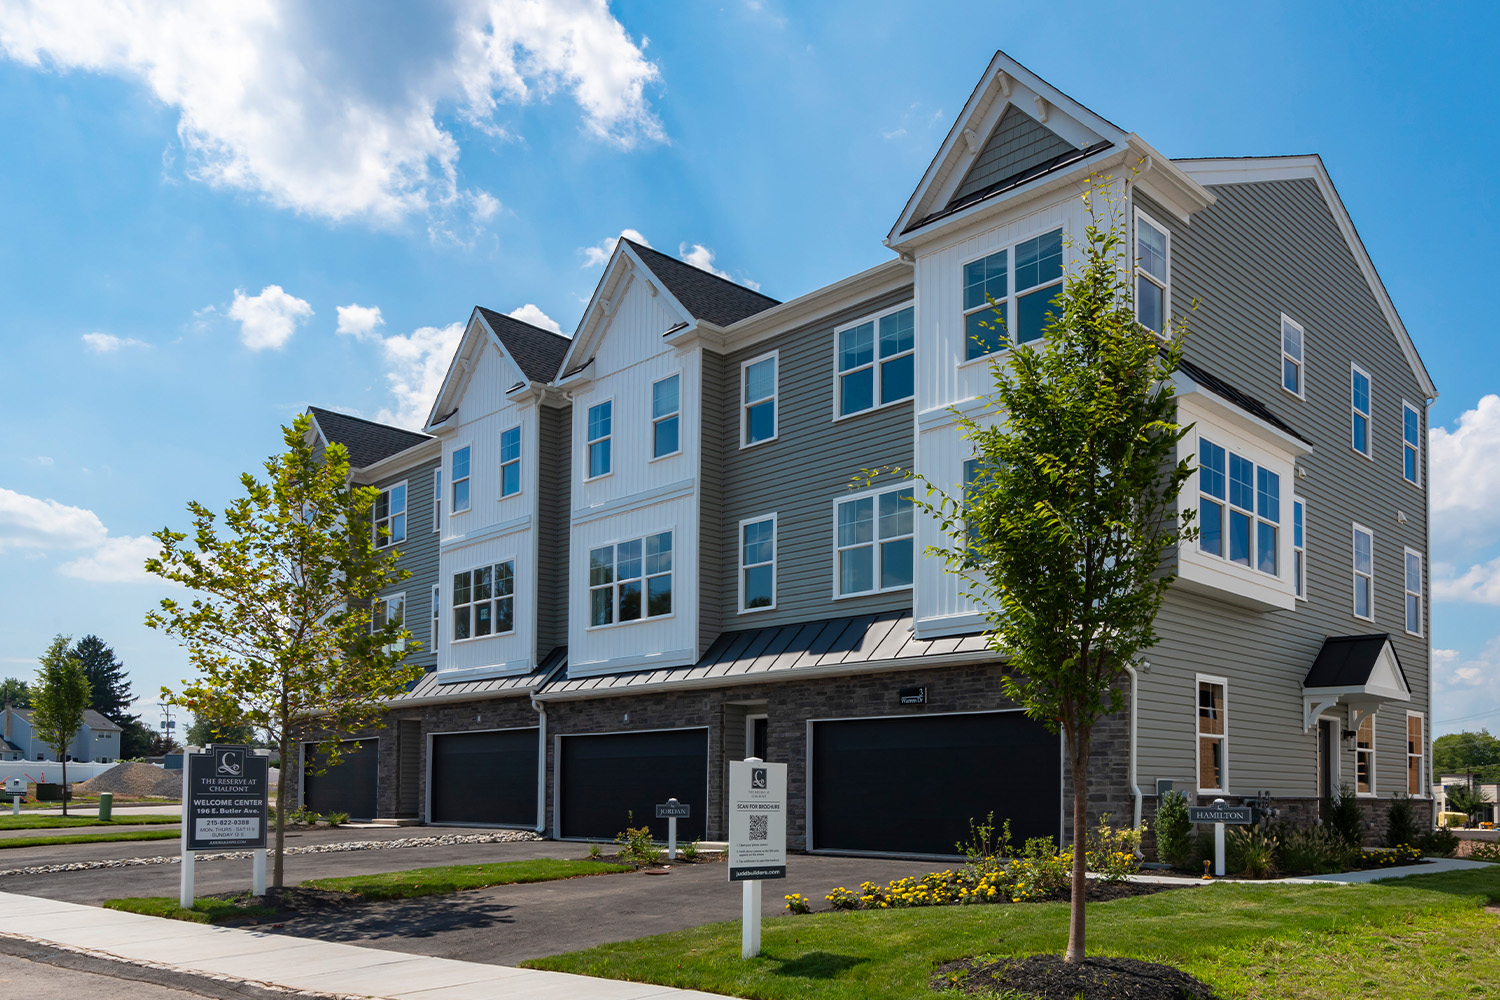 Exterior of The Reserve at Chalfont townhomes in Chalfont, PA